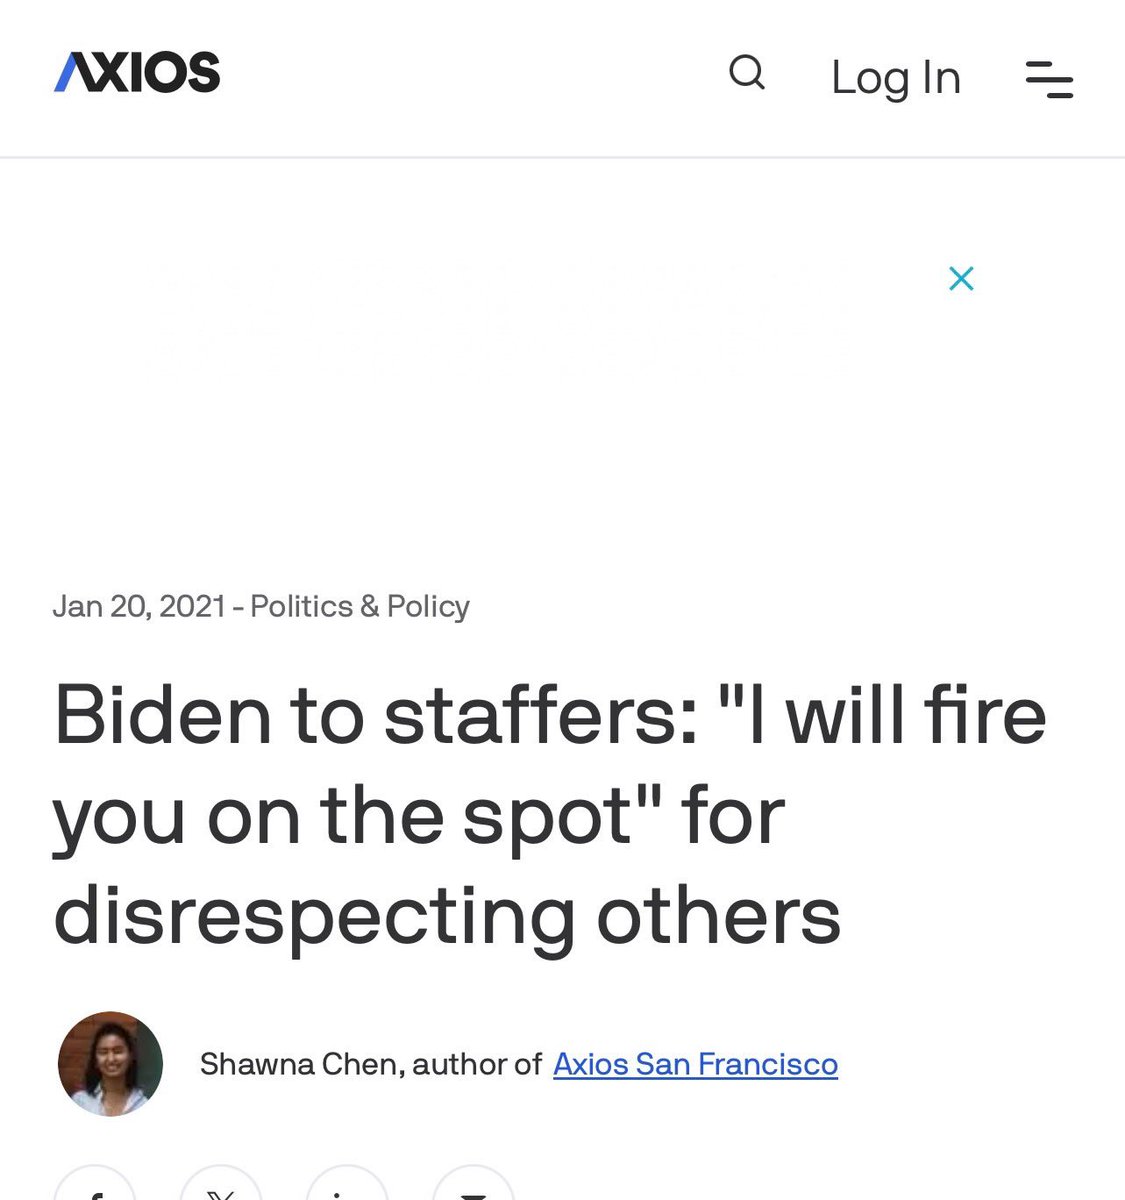 Biden hired him. He said anyone to be found harassing people would be fired. Oh, I forgot Joey is a pathological liar.